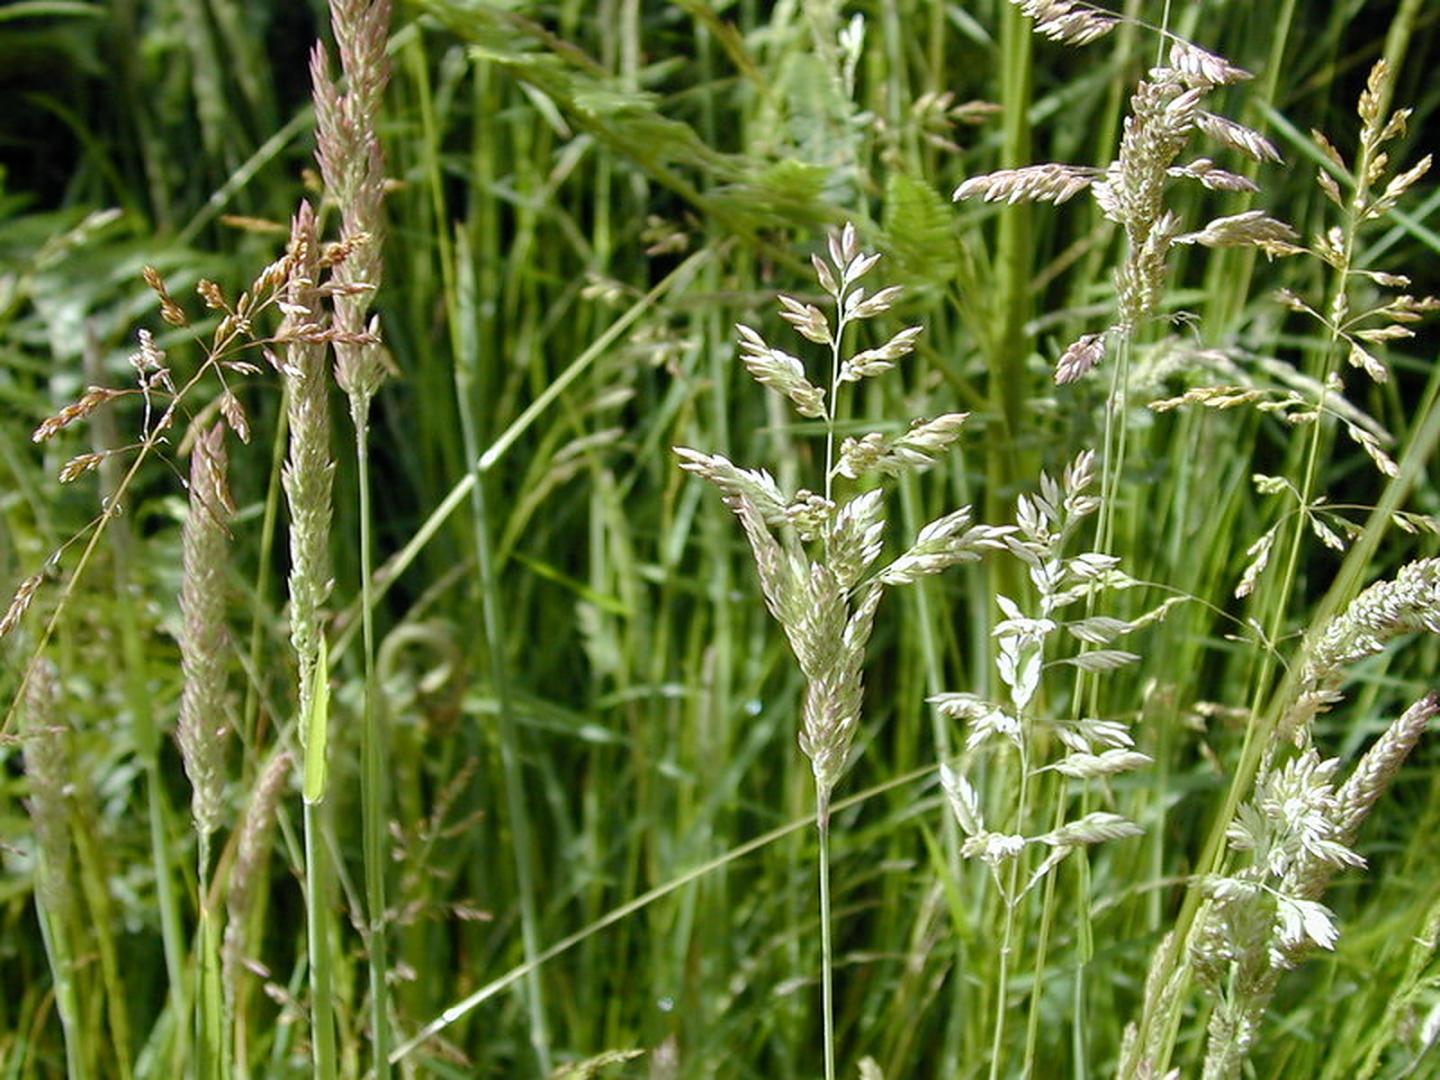 Grasses on the Rothamsted Research Experimental Field